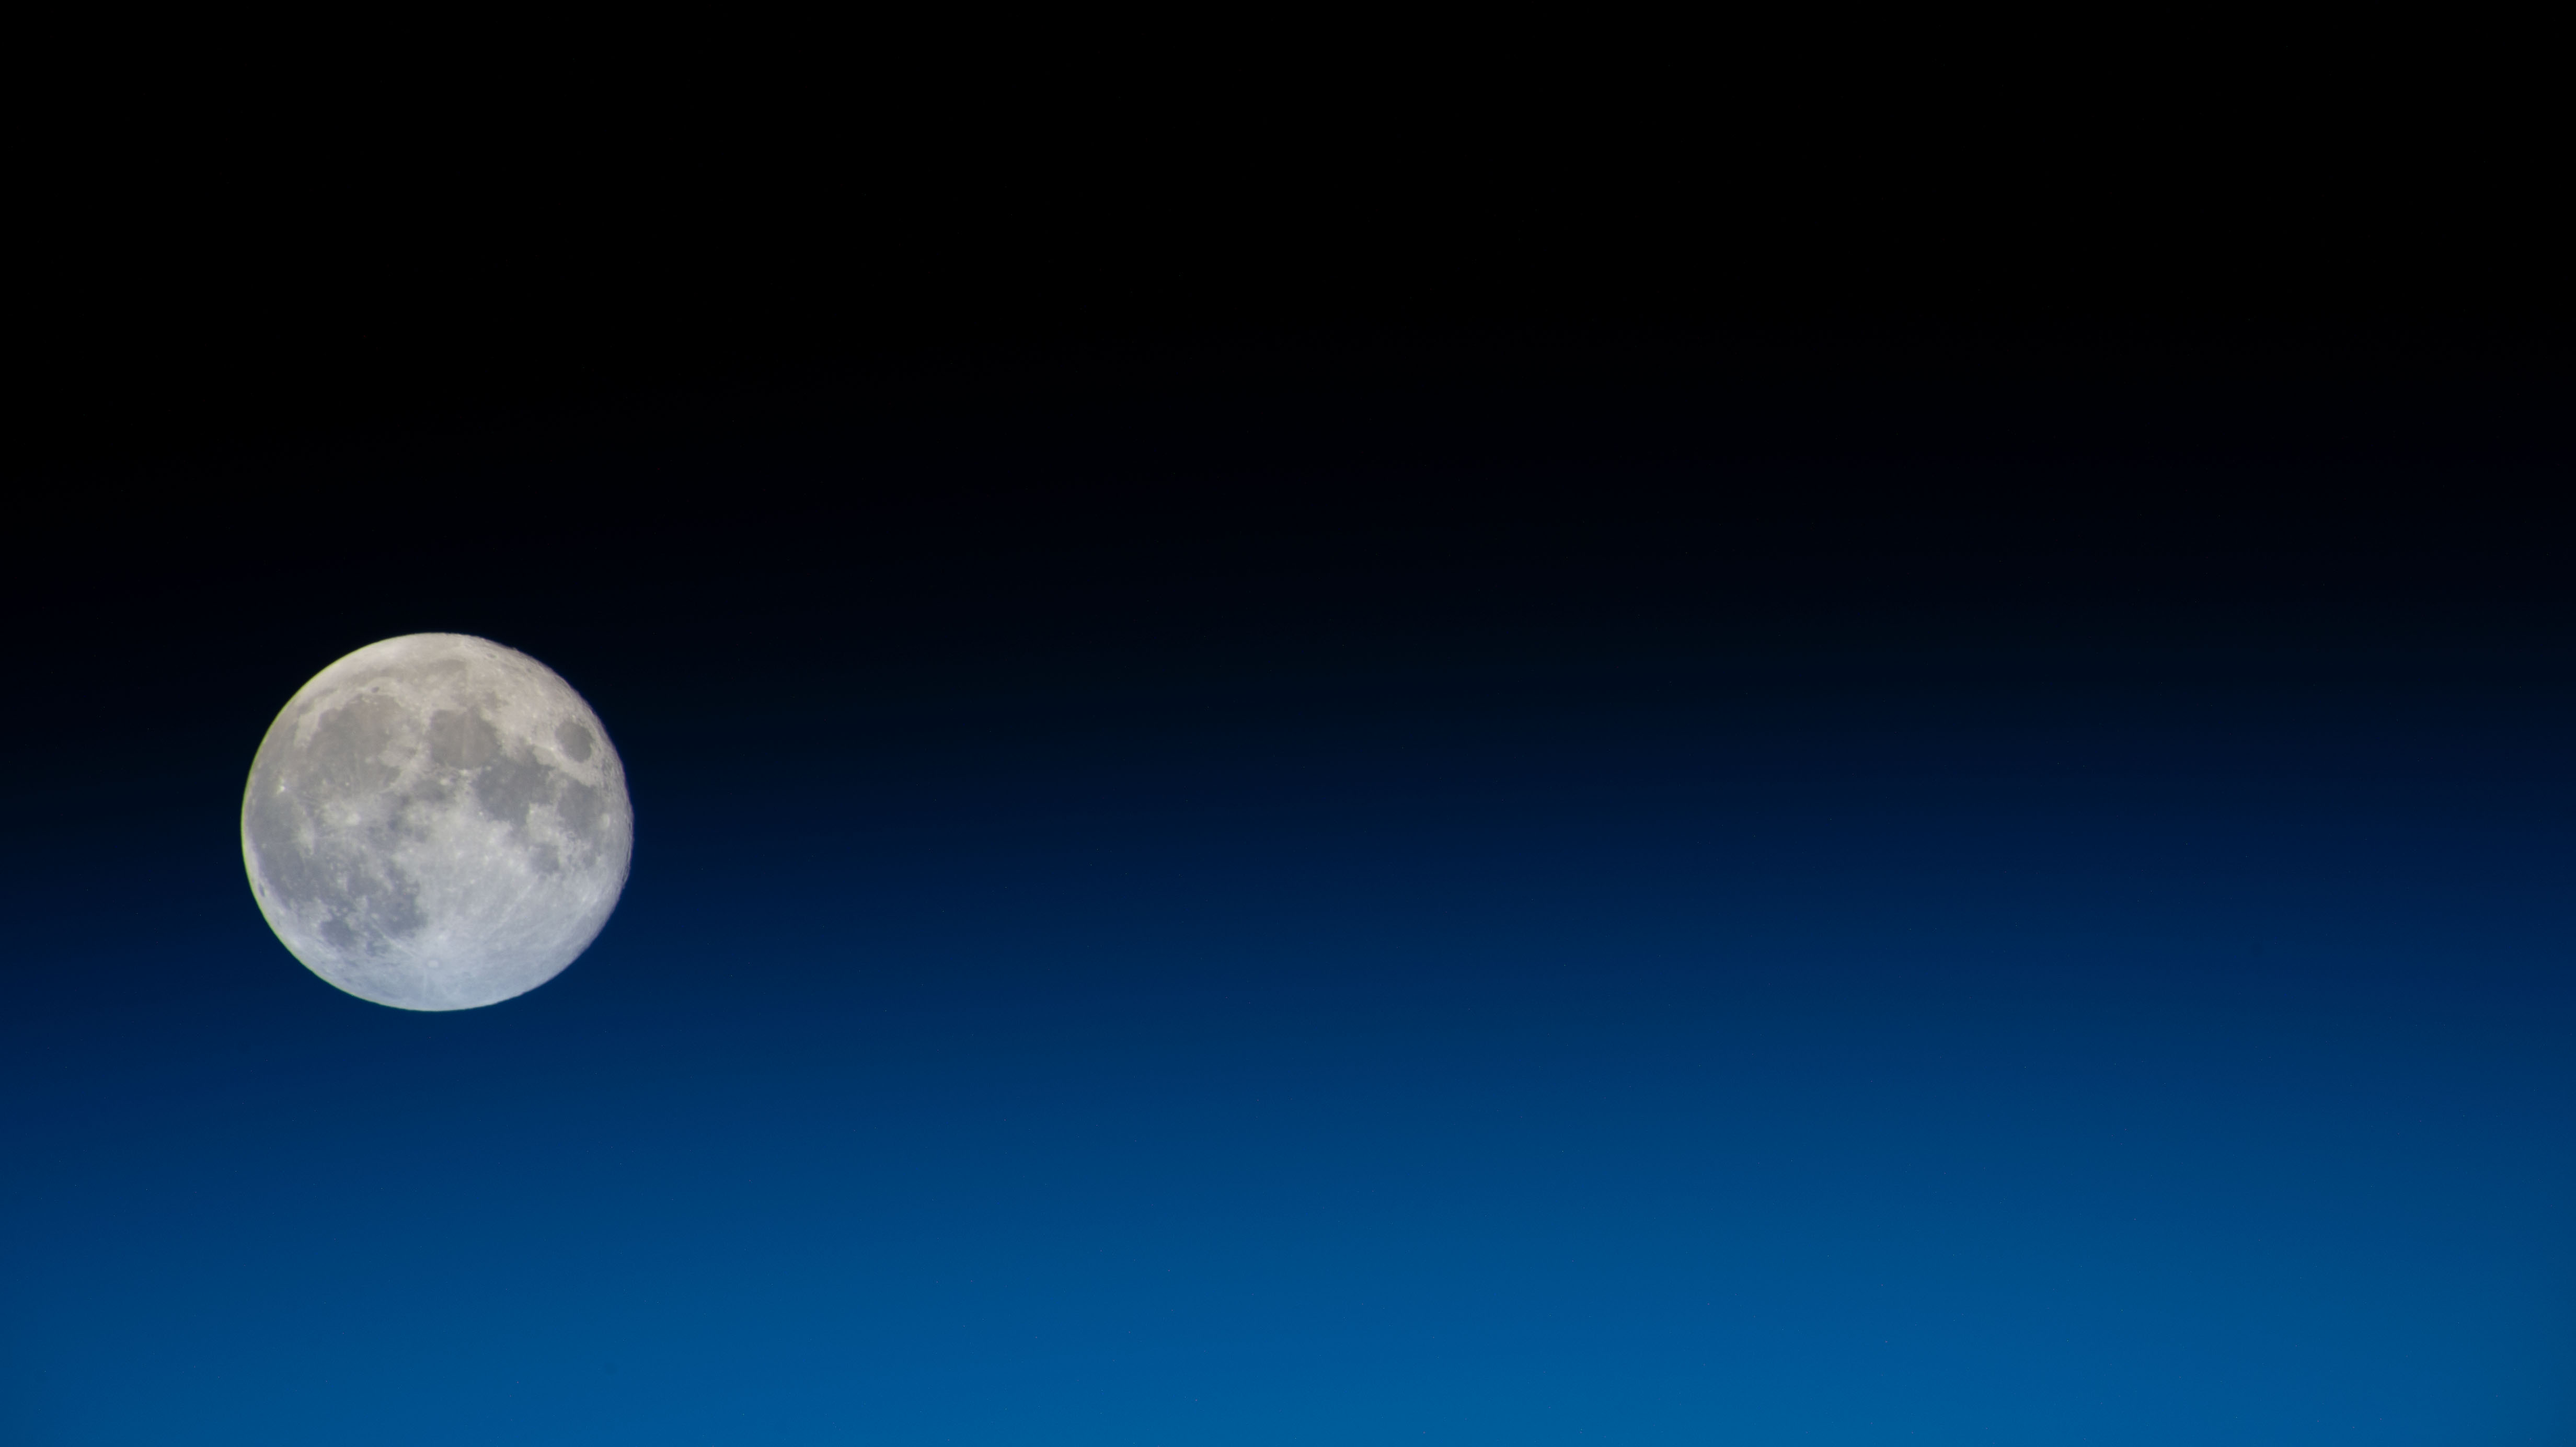 A Full Moon with Earth’s Blue Glow Beneath it